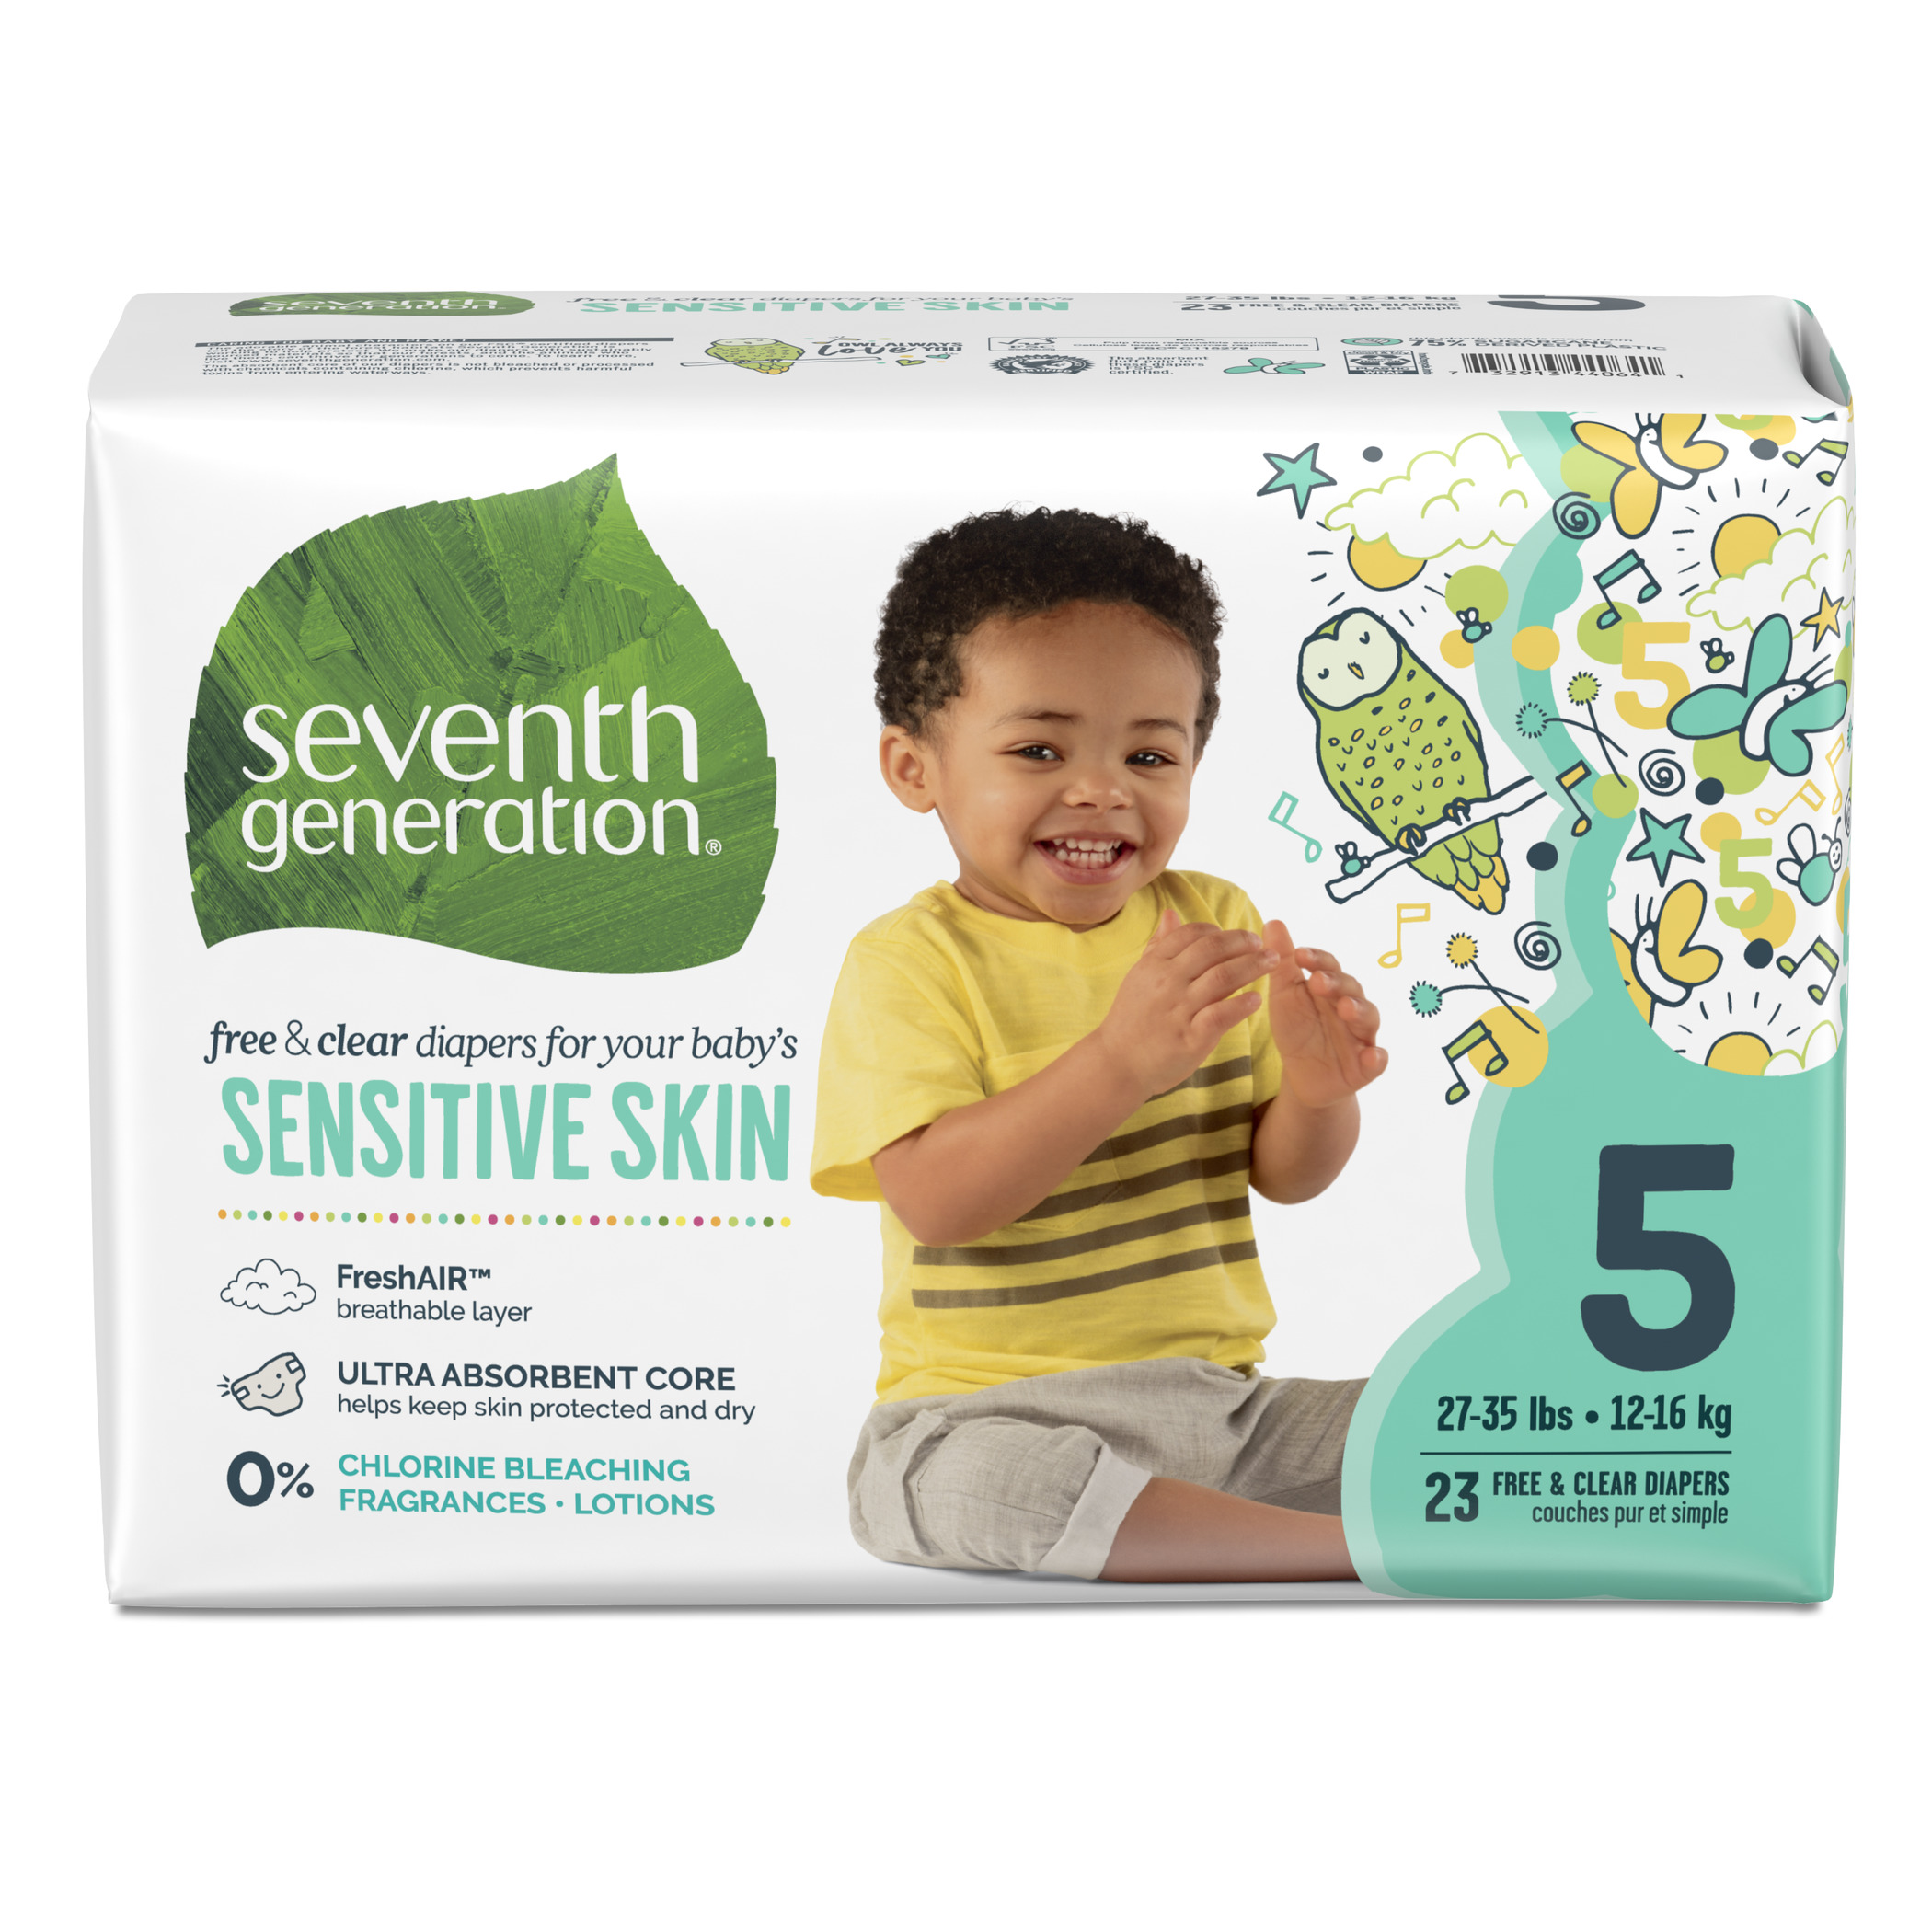 seventh generation diapers size 2